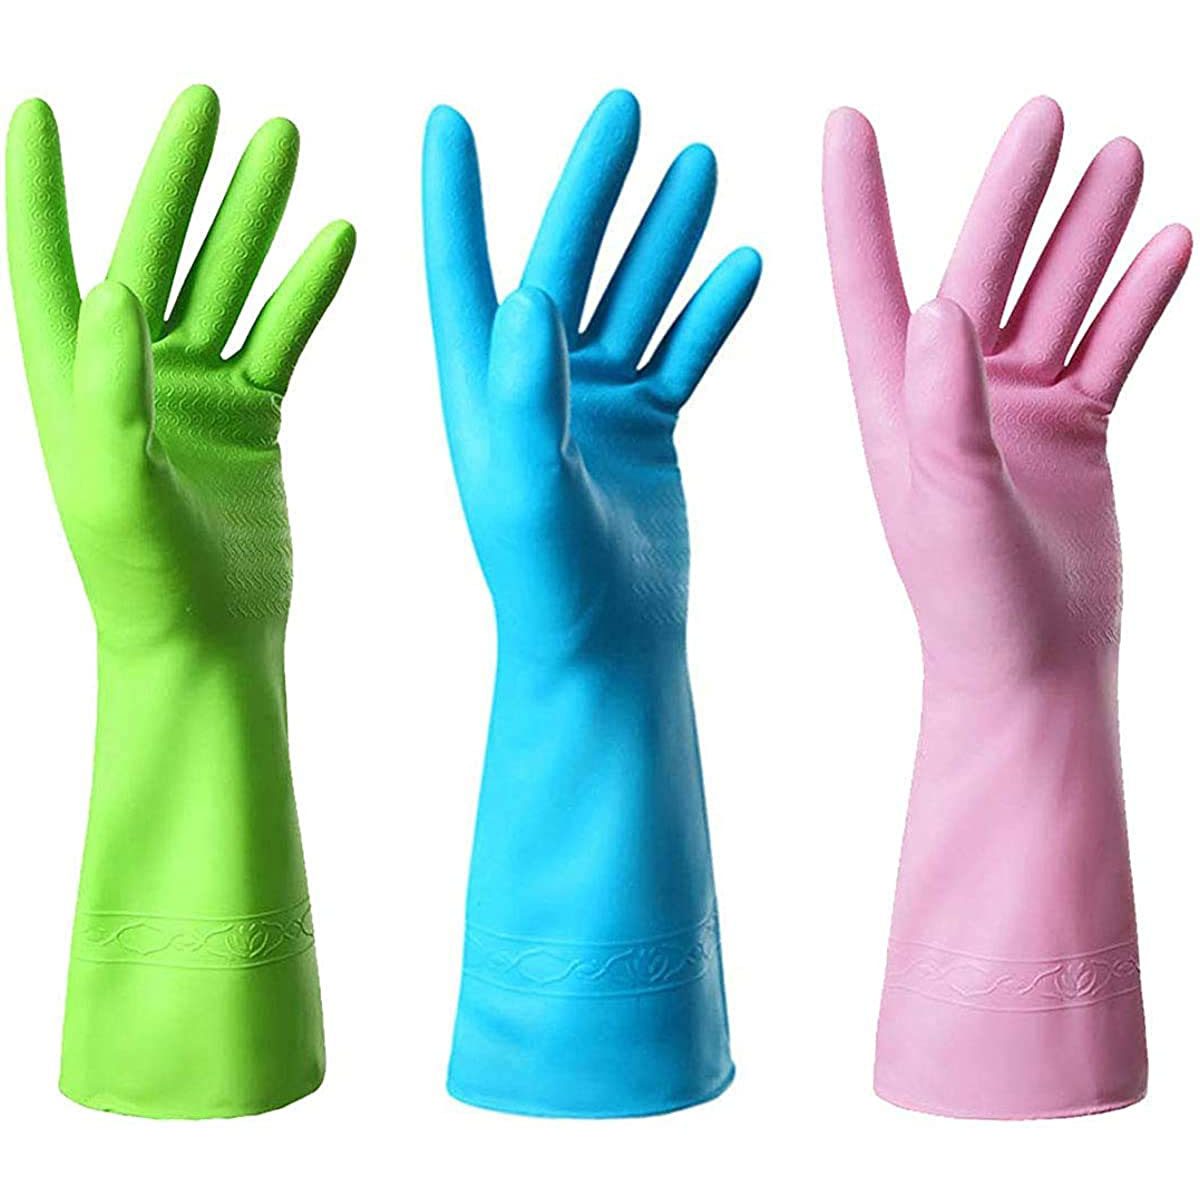 12 Pairs Strong Household and Kitchen Gloves Long Sleeve Cleaning rubber Gloves Dishwashing Gloves Pink, Large-9 